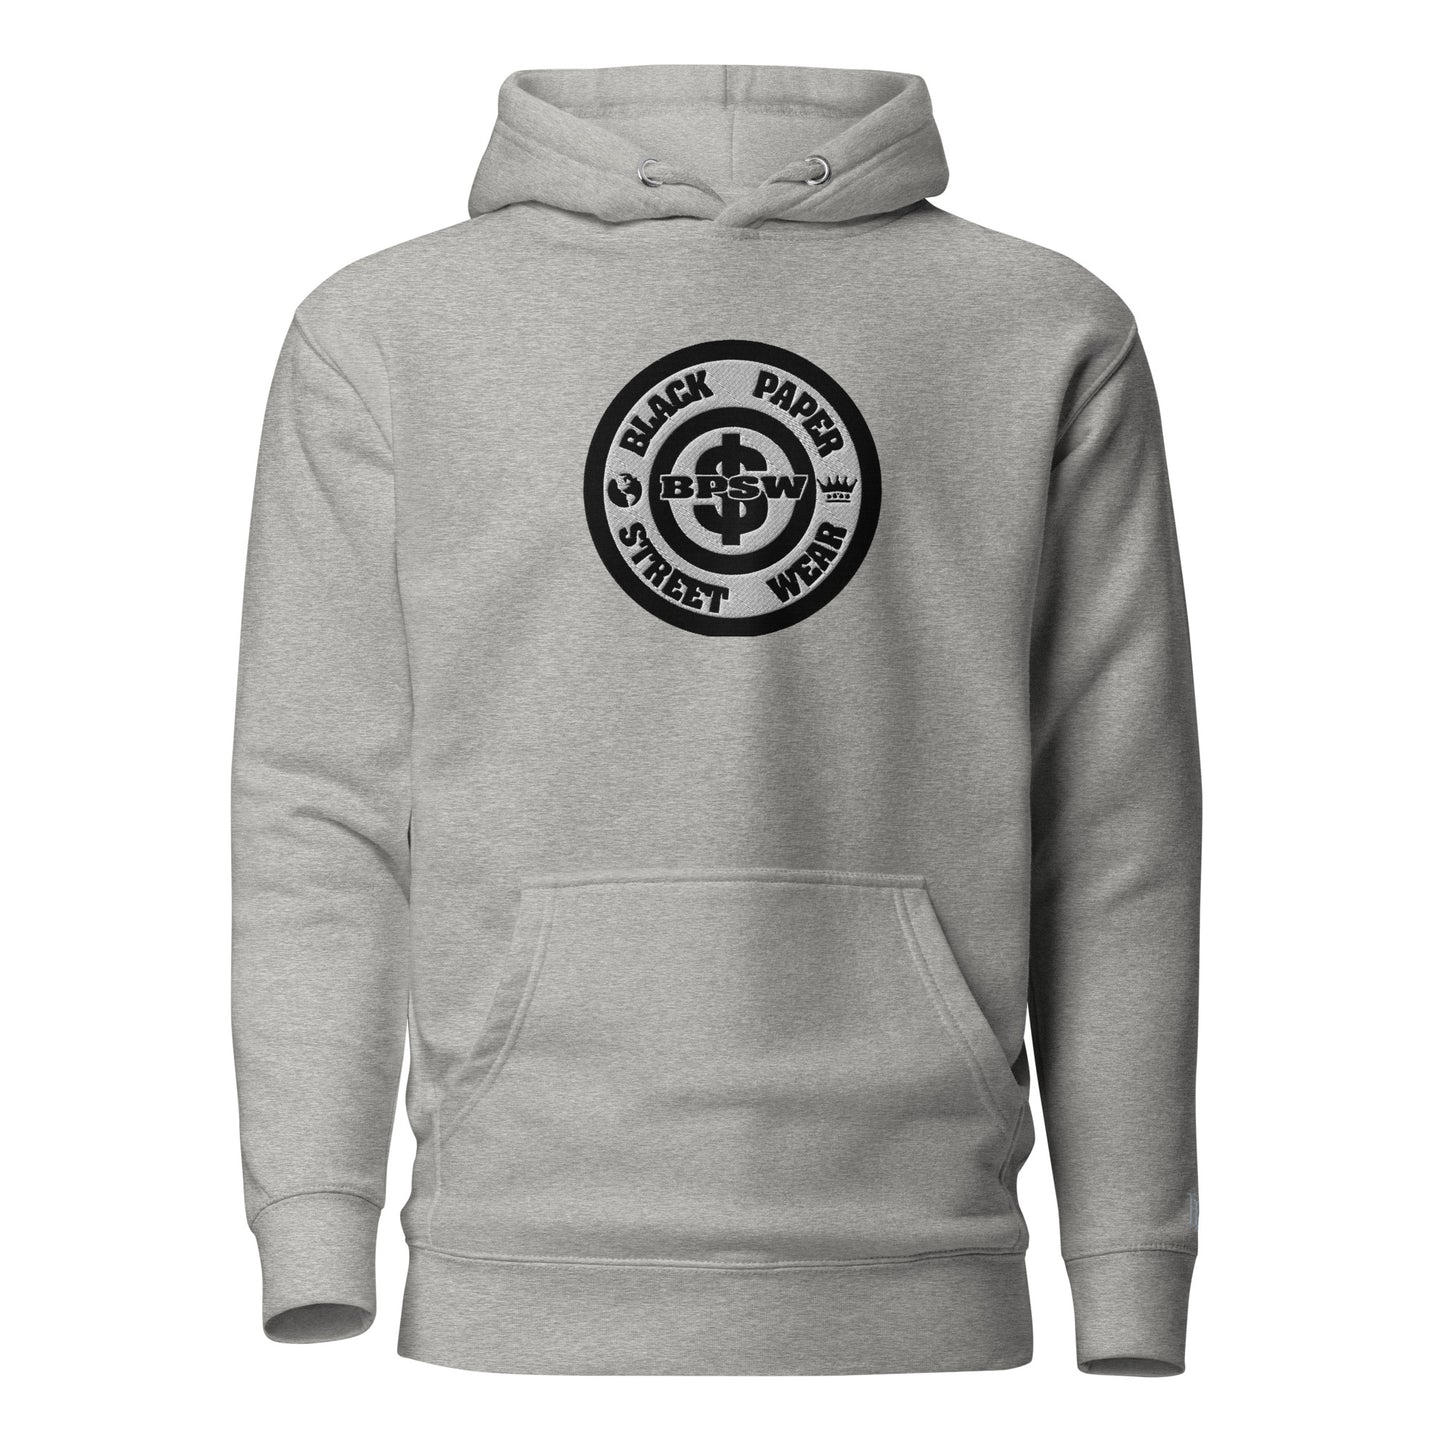 Sweatsuit Hoodie - Embroidered Circle Logo